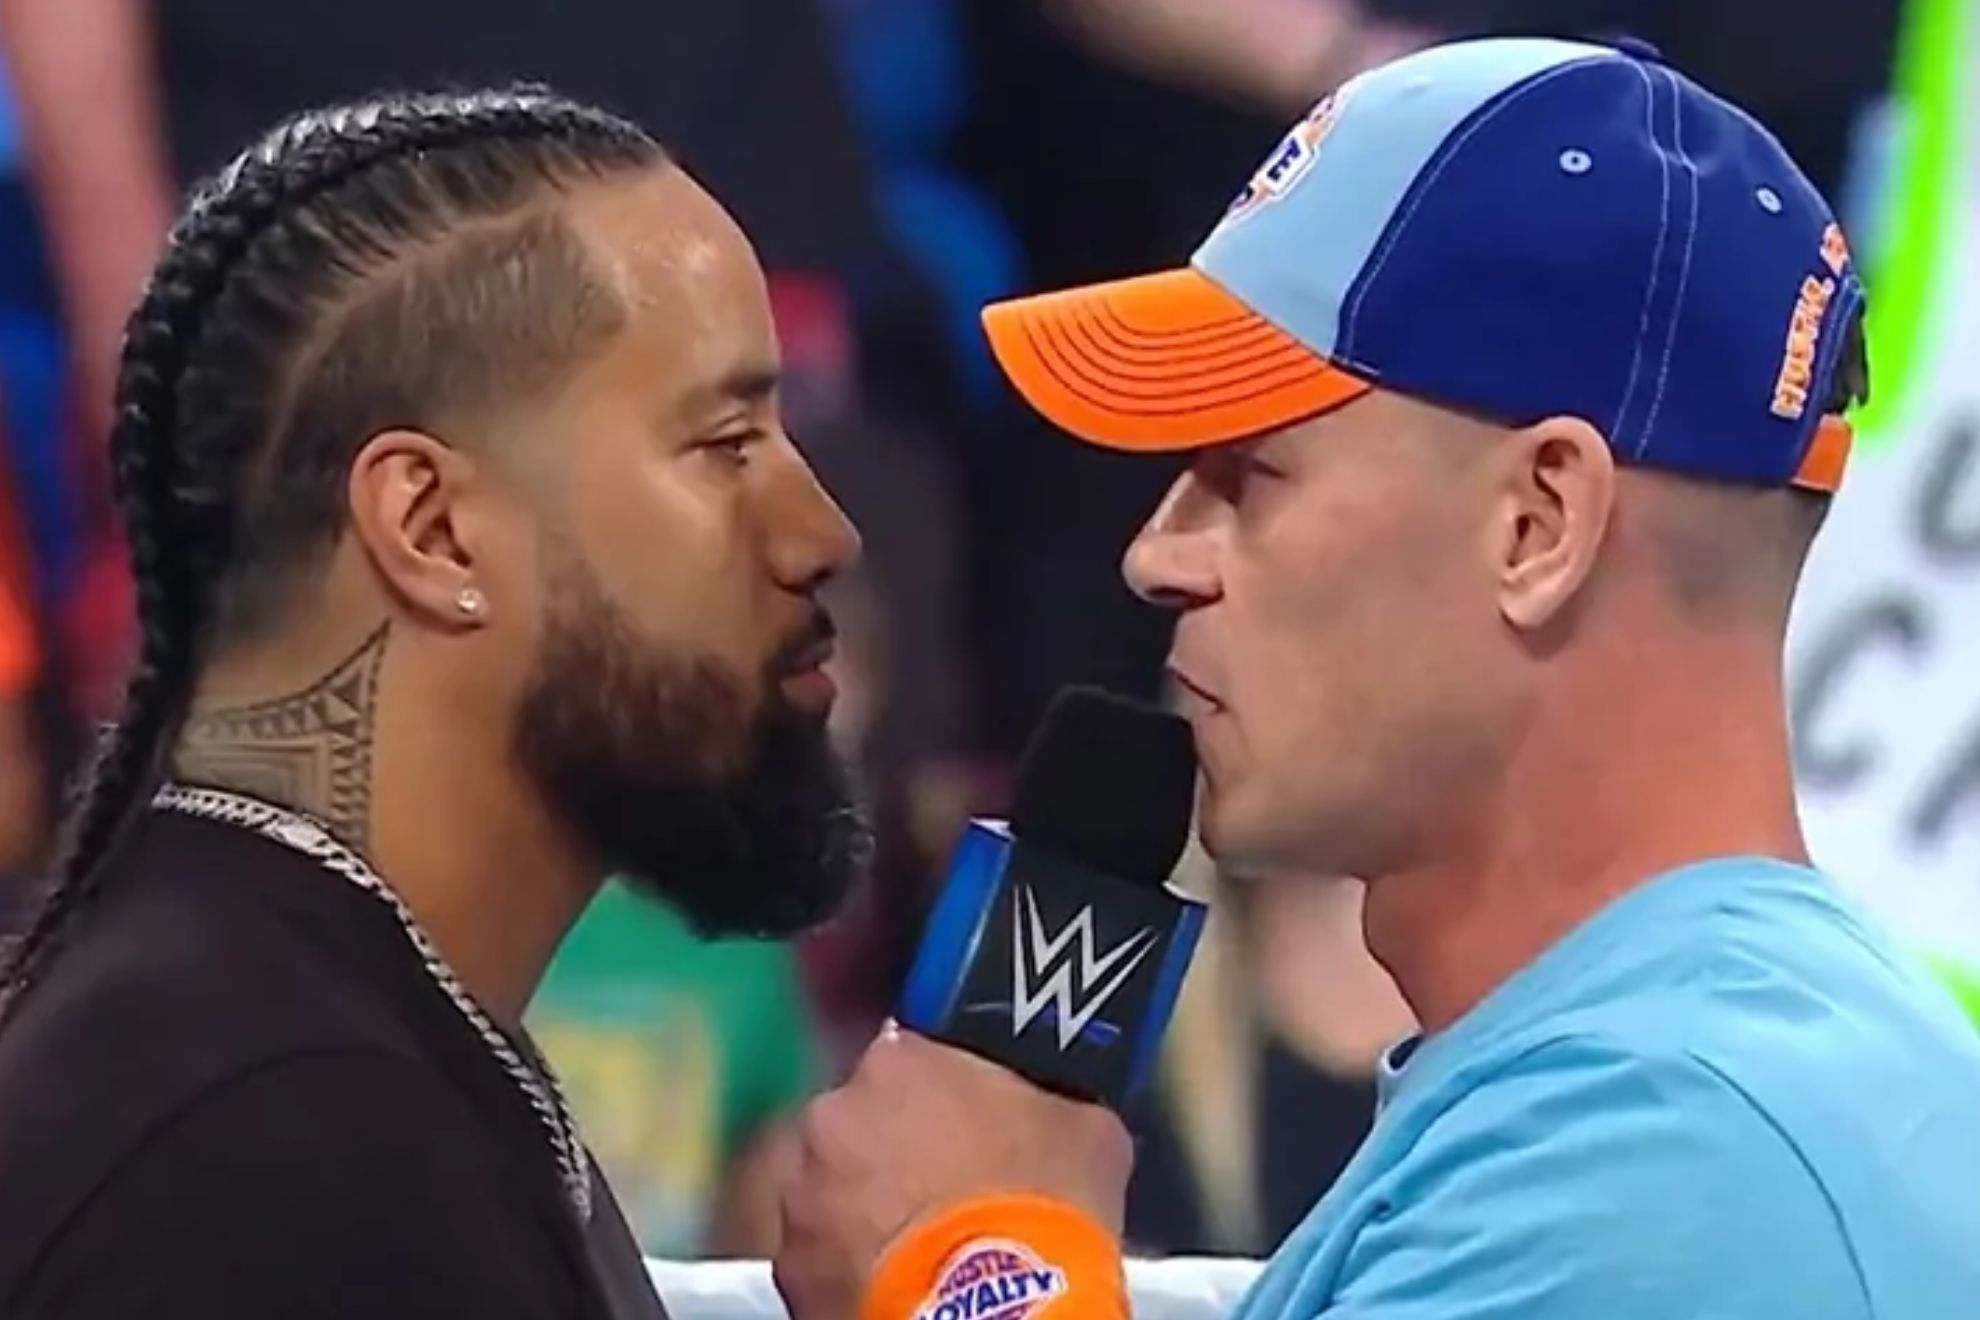 John Cena puts Jimmy Uso in his place at WWE's highly anticipated 'Payback' show